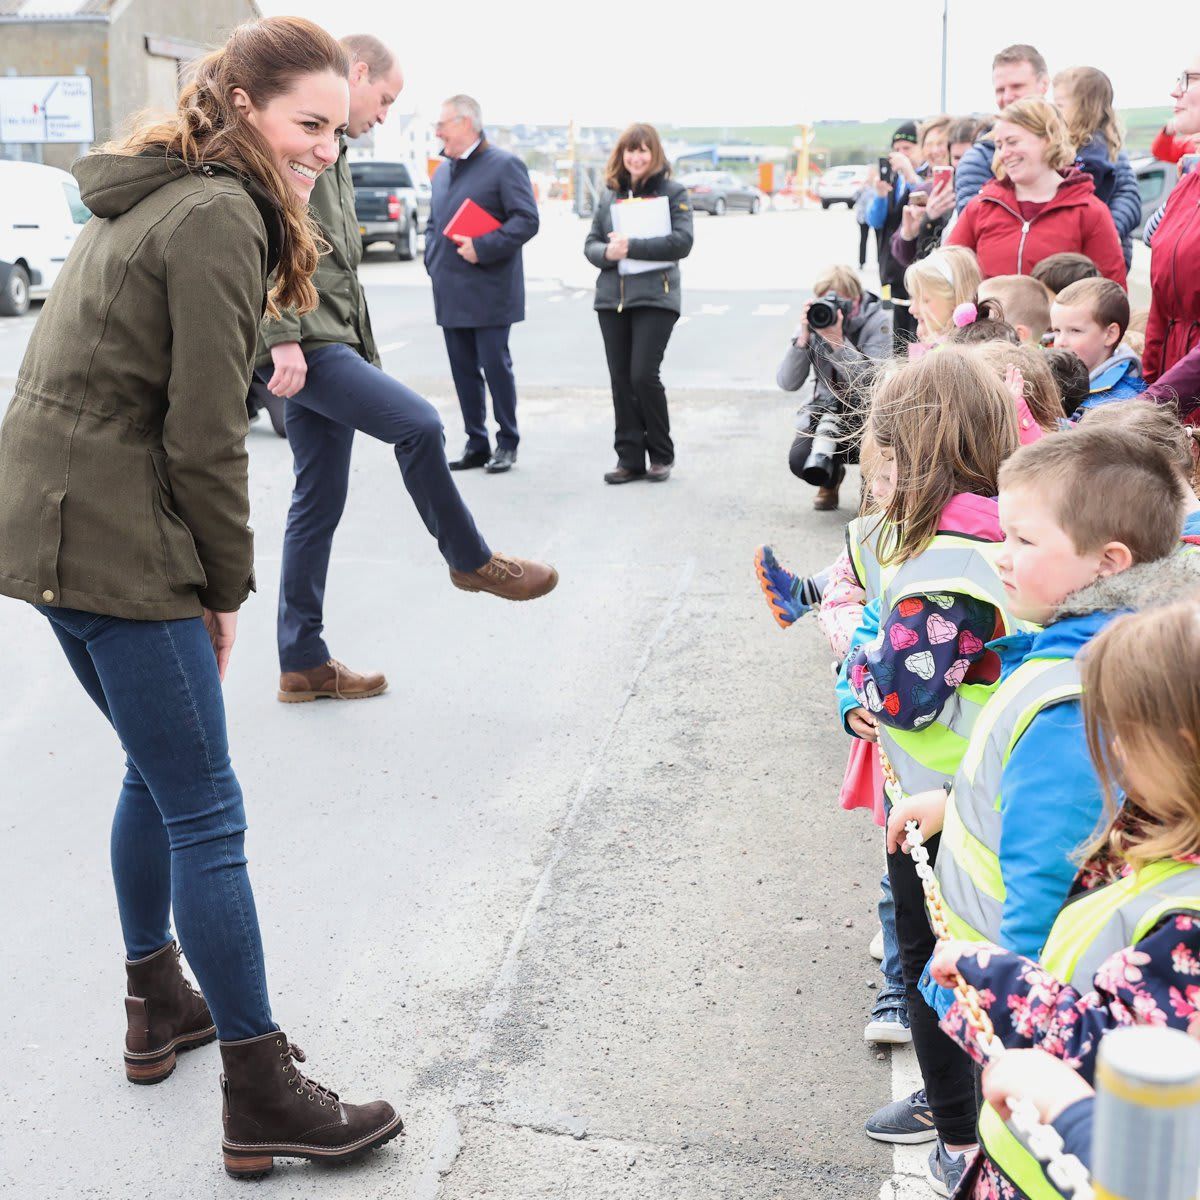 The Duke and Duchess of Cambridge spoke with young children during their visit to Orkney on May 25